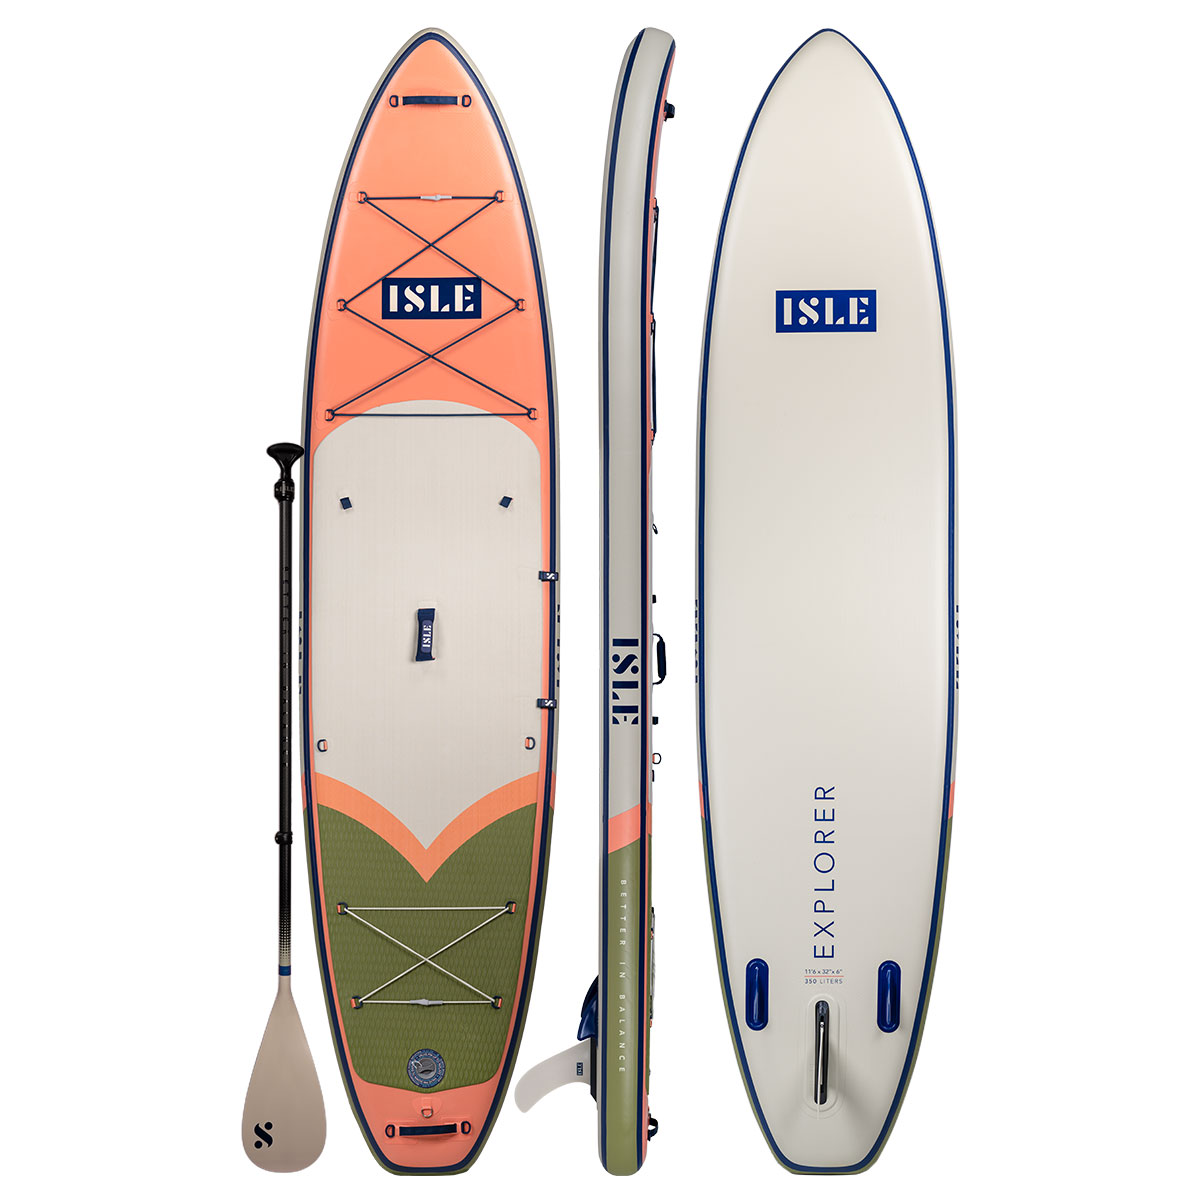 Explorer 2.0Inflatable Stand Up Paddle Board PackageCrafted for our fitness and adventure-loving paddlers, this inflatable paddle board is made with a double layer, drop-stitch construction, making it extremely durable and functional for every water condition and activity.